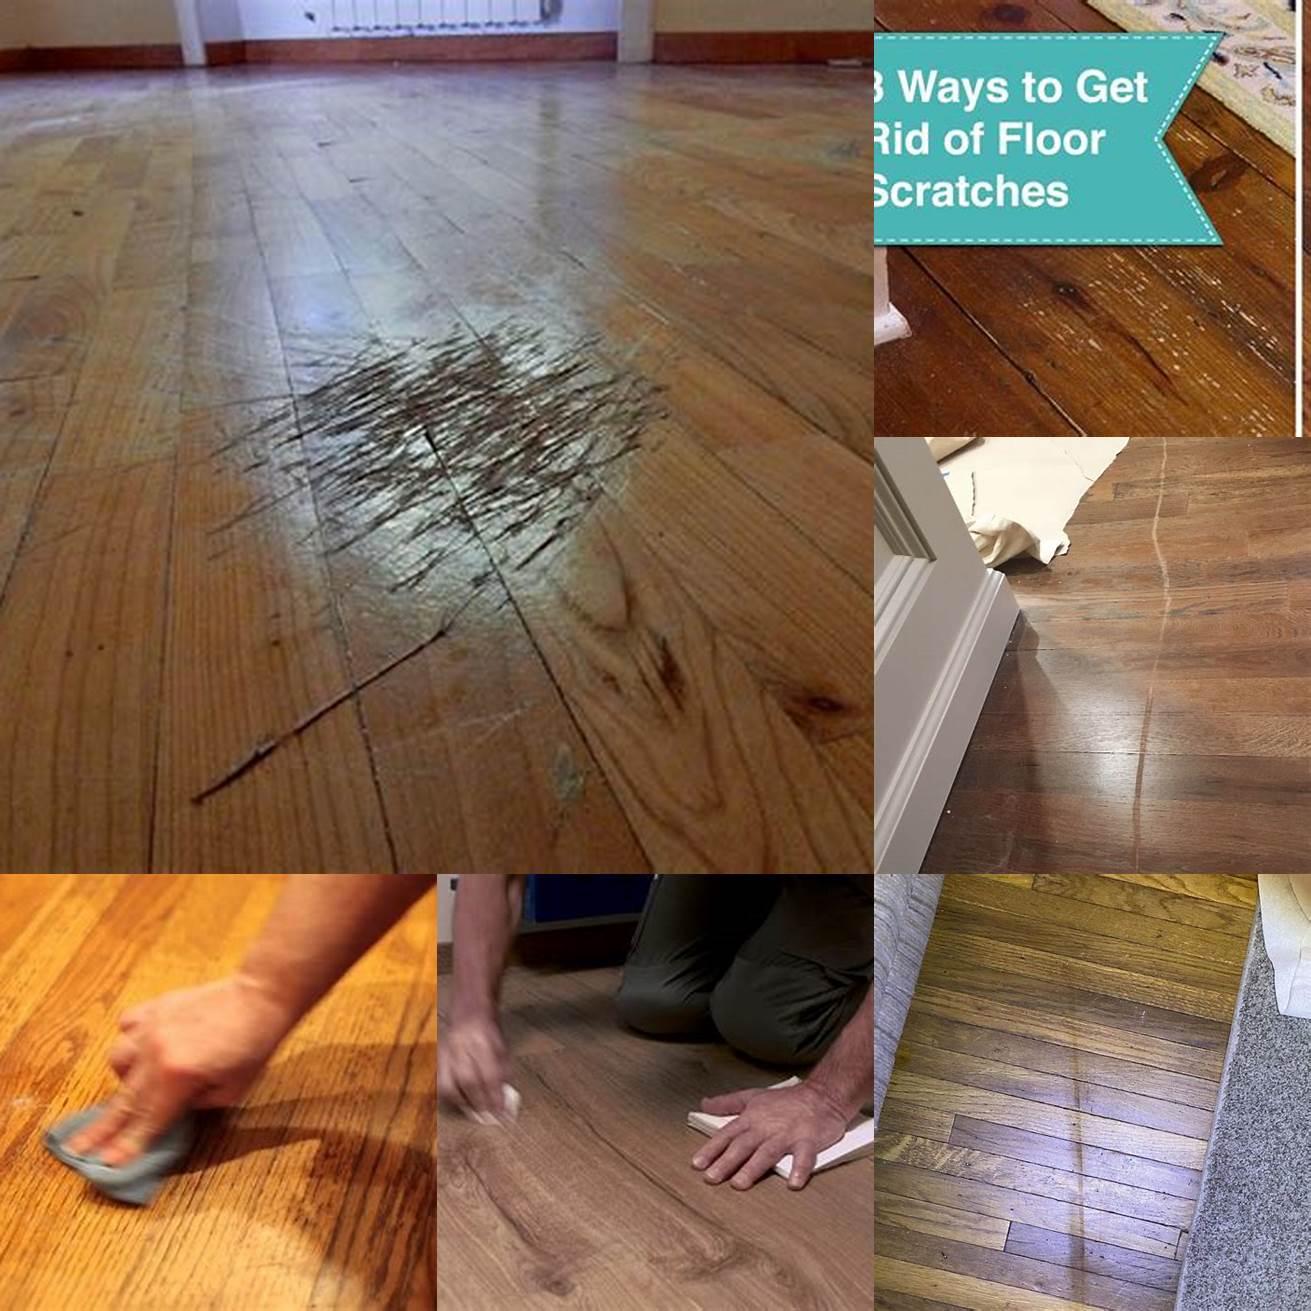 Protects floors from scratches scuffs and other damage